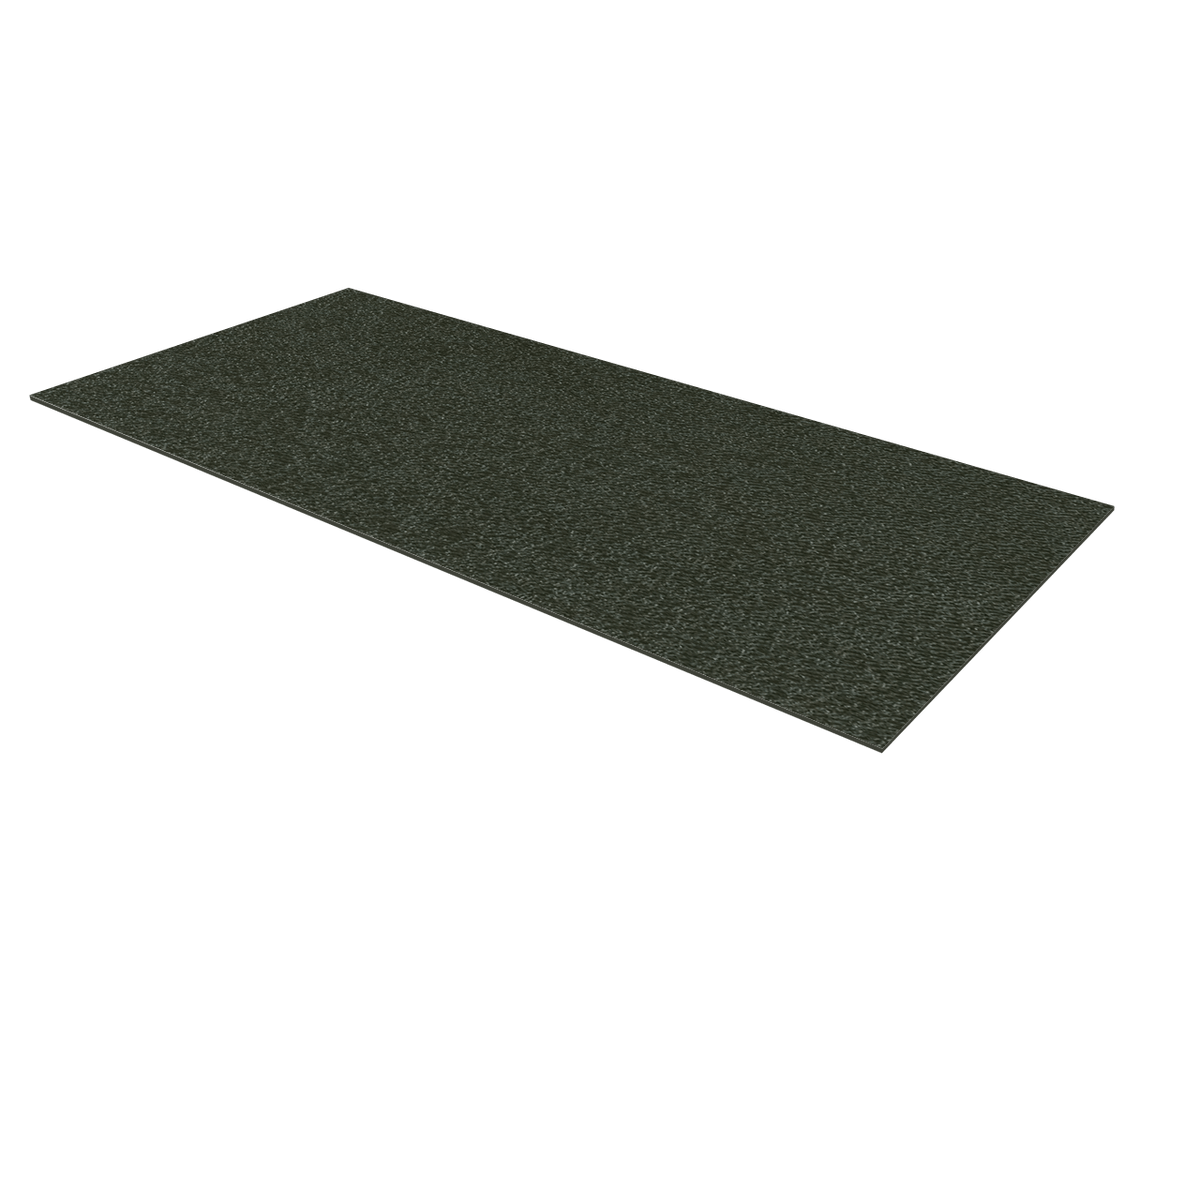 ABS Plastic Sheet - Olive Drab